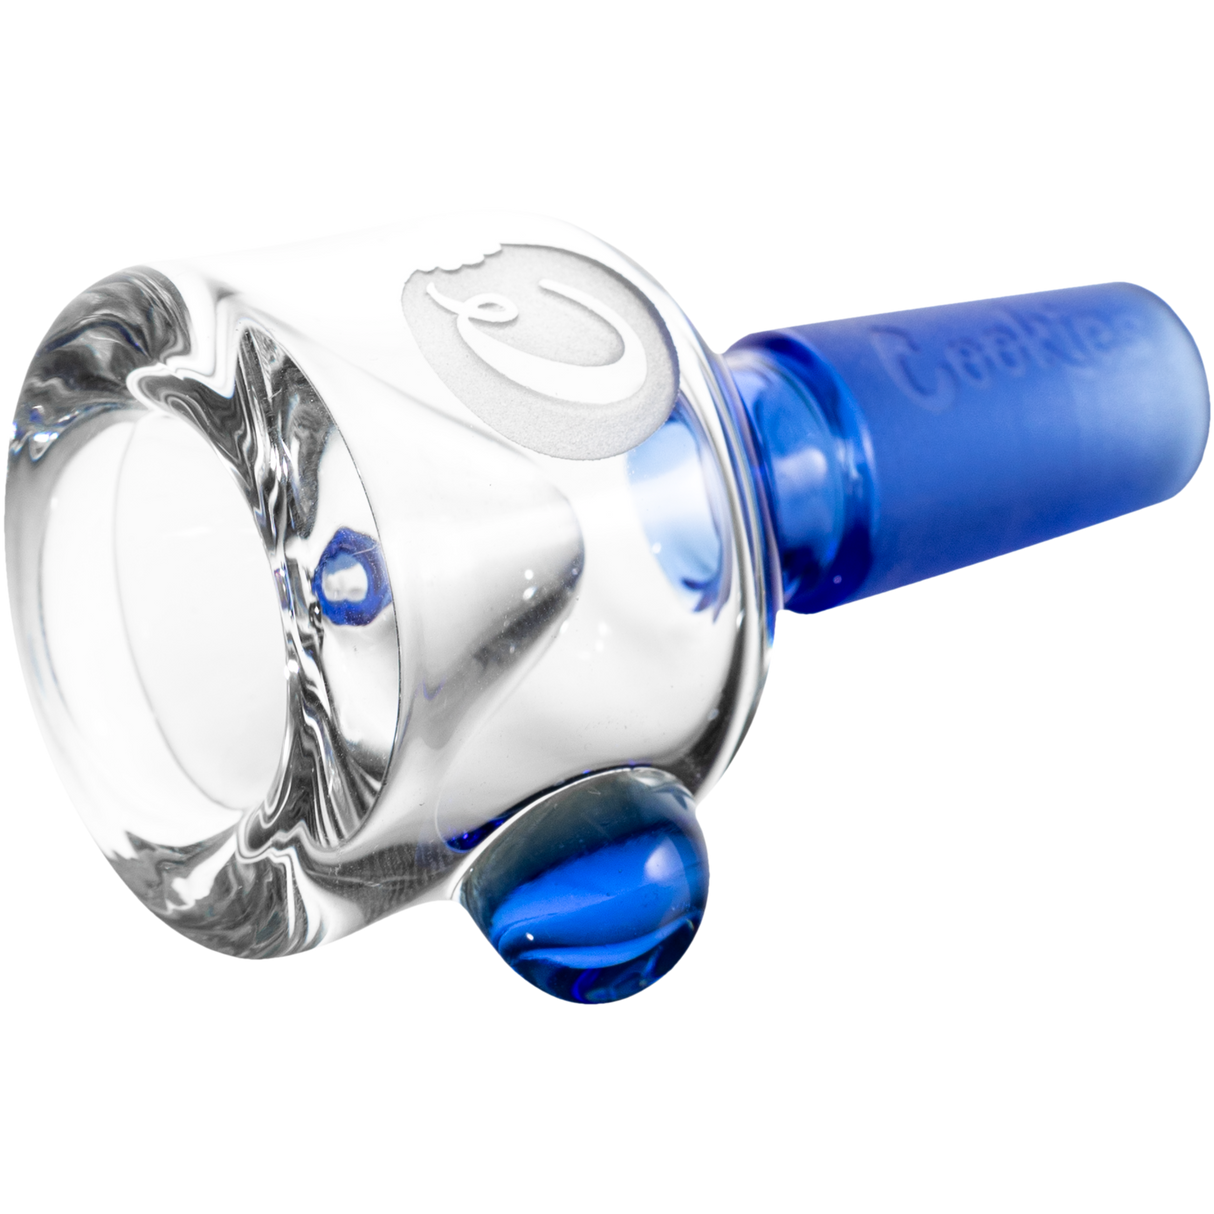 Cookies Classic Bong Bowl in blue and clear borosilicate glass, 14mm joint size, angled side view